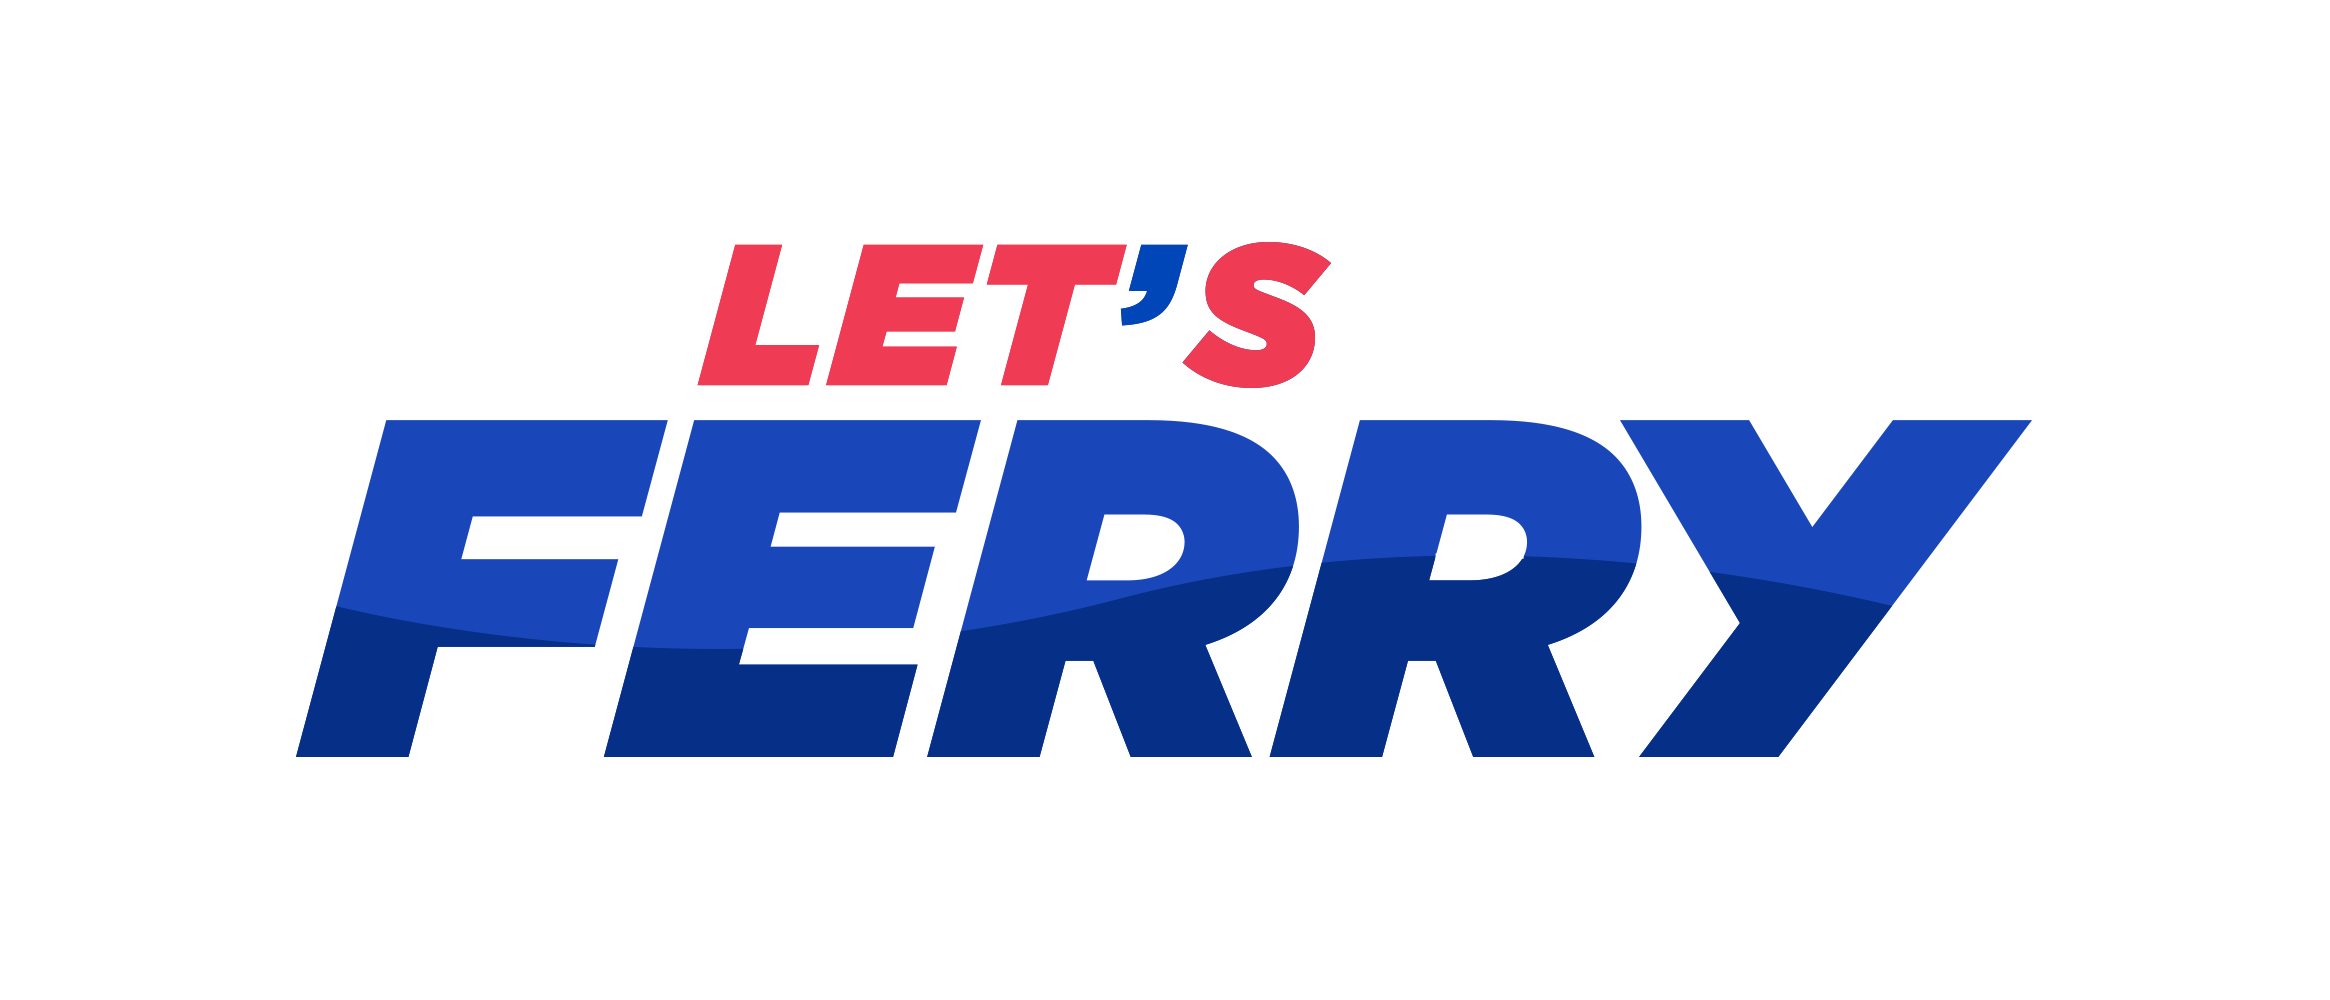 Let's Ferry